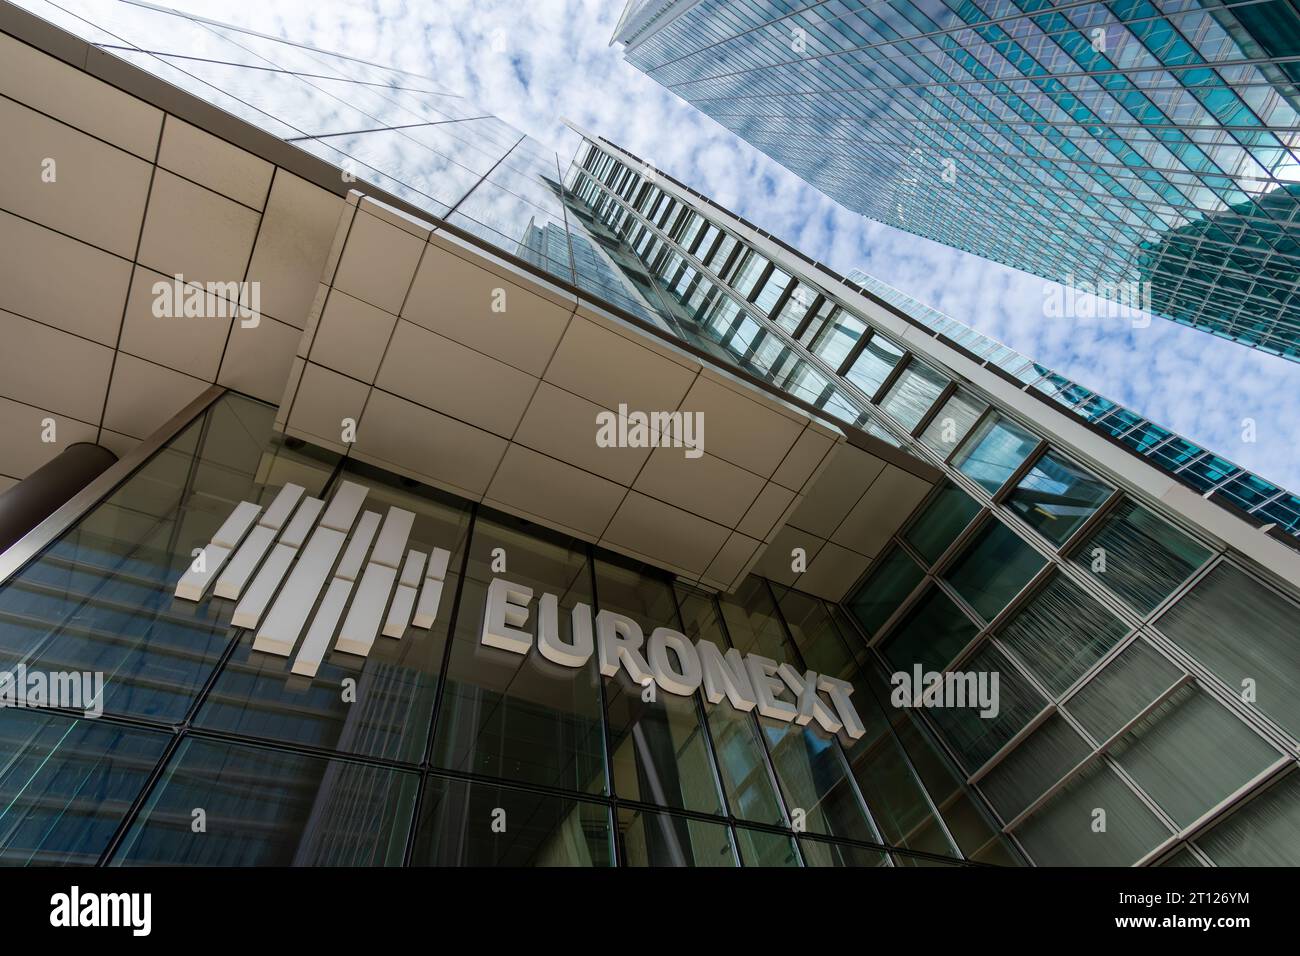 Sign and logo at the entrance to the Euronext building in the Paris La Defense business district. Euronext is the main stock exchange in the euro zone Stock Photo